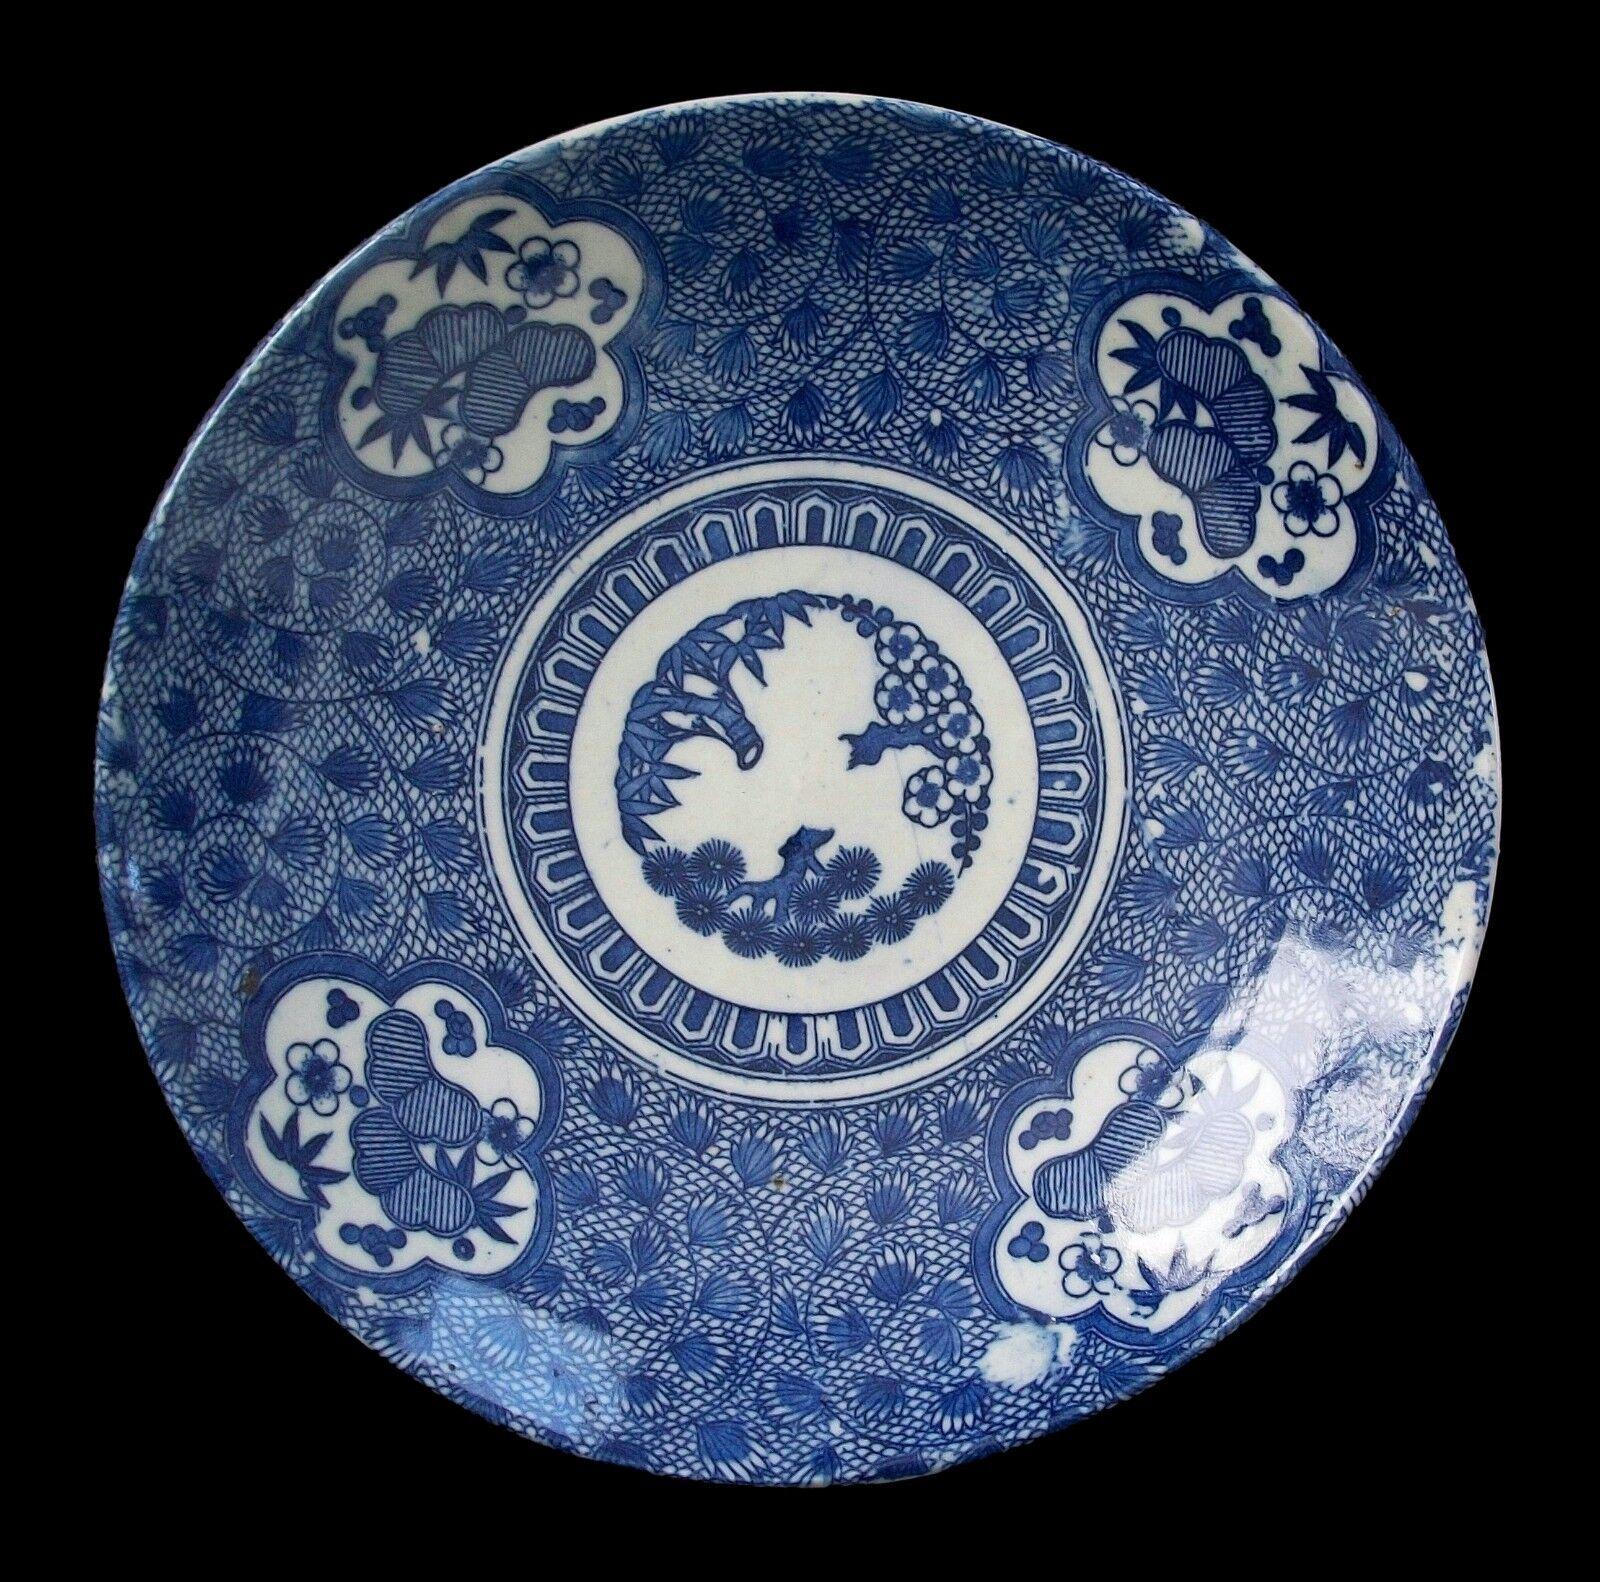 Vintage blue and white transfer decorated charger - wheel thrown body - unsigned - Japan - mid 20th century.

Excellent vintage condition - no loss - no damage - no restoration - glaze/body and transfer imperfections as part of the manufacturing